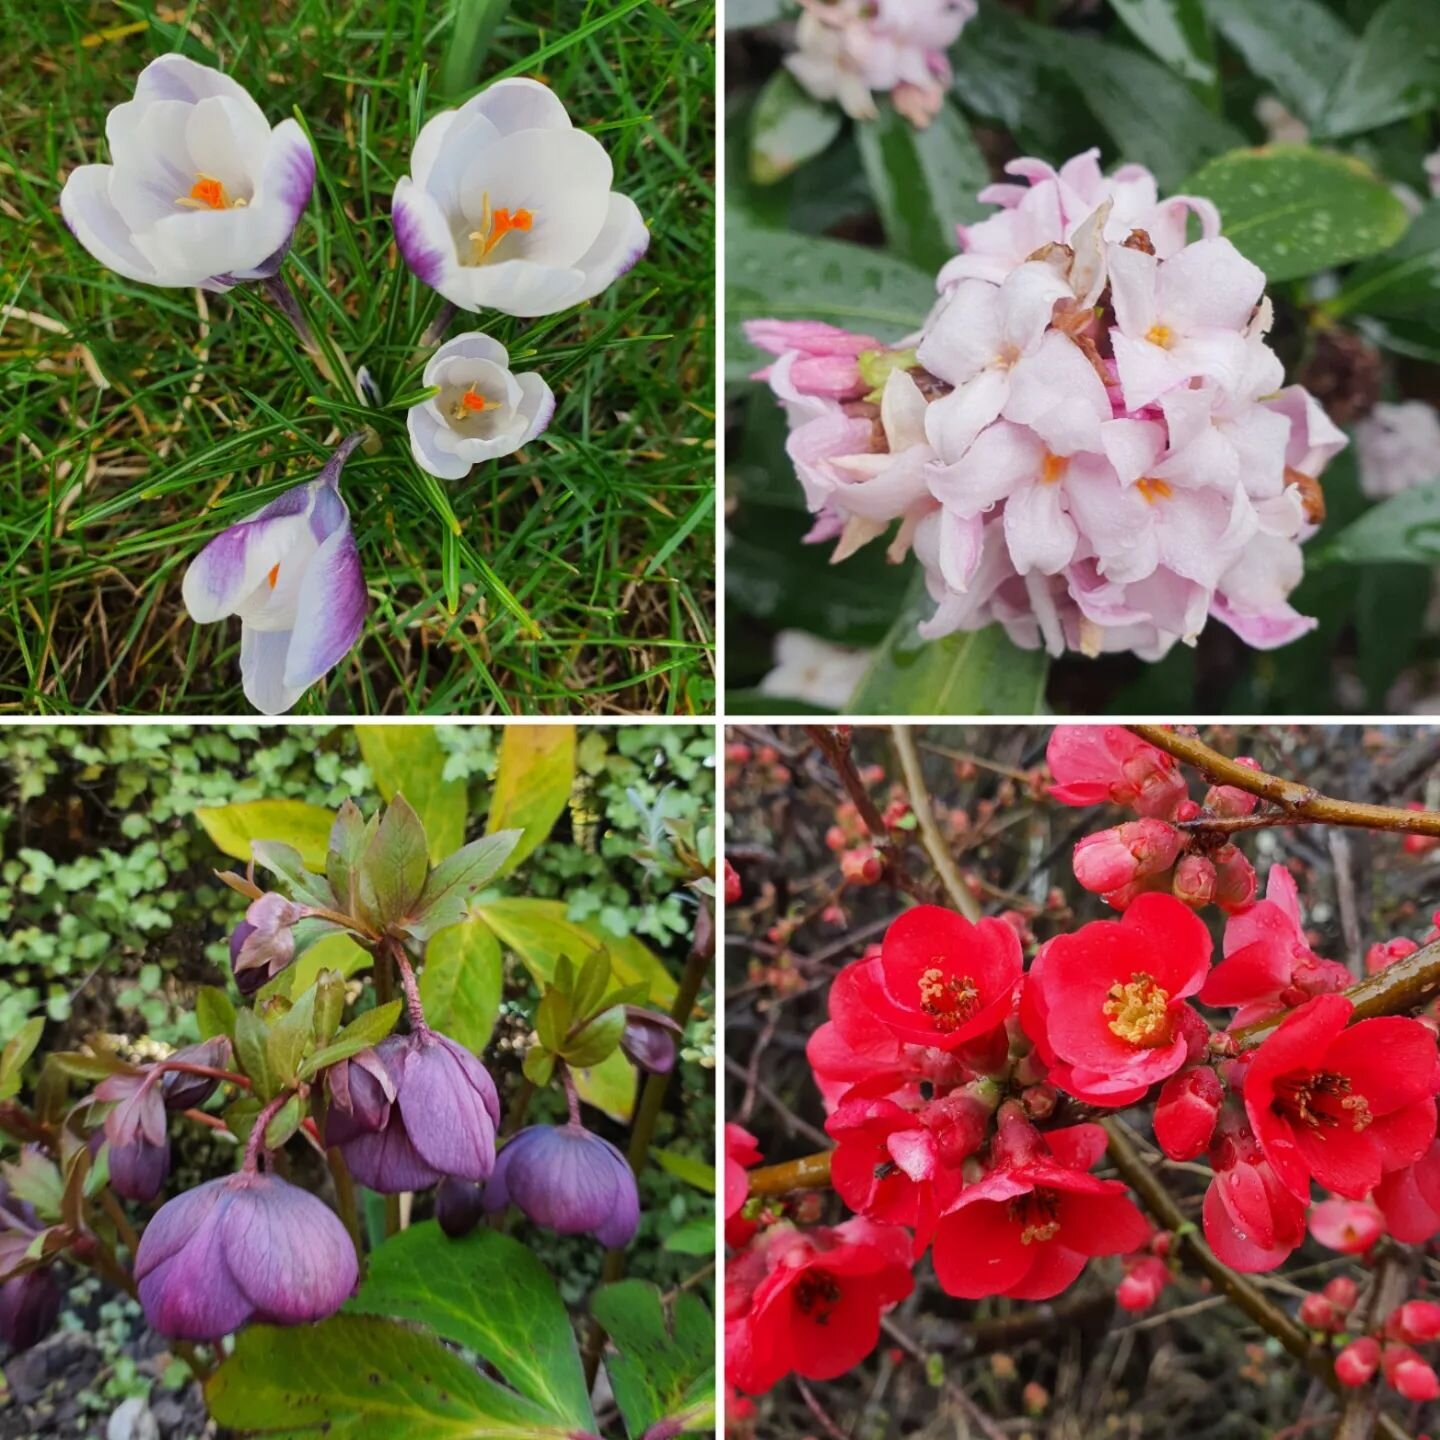 Happy first day of spring! Here's some flowers from todays gardens we were working in...then the rain arrived, very spring like weather indeed.

#dougthegardener #gardenwanaka #landscapewanaka #wanakagardens #wanakagarden #wanakagardening #landscape 